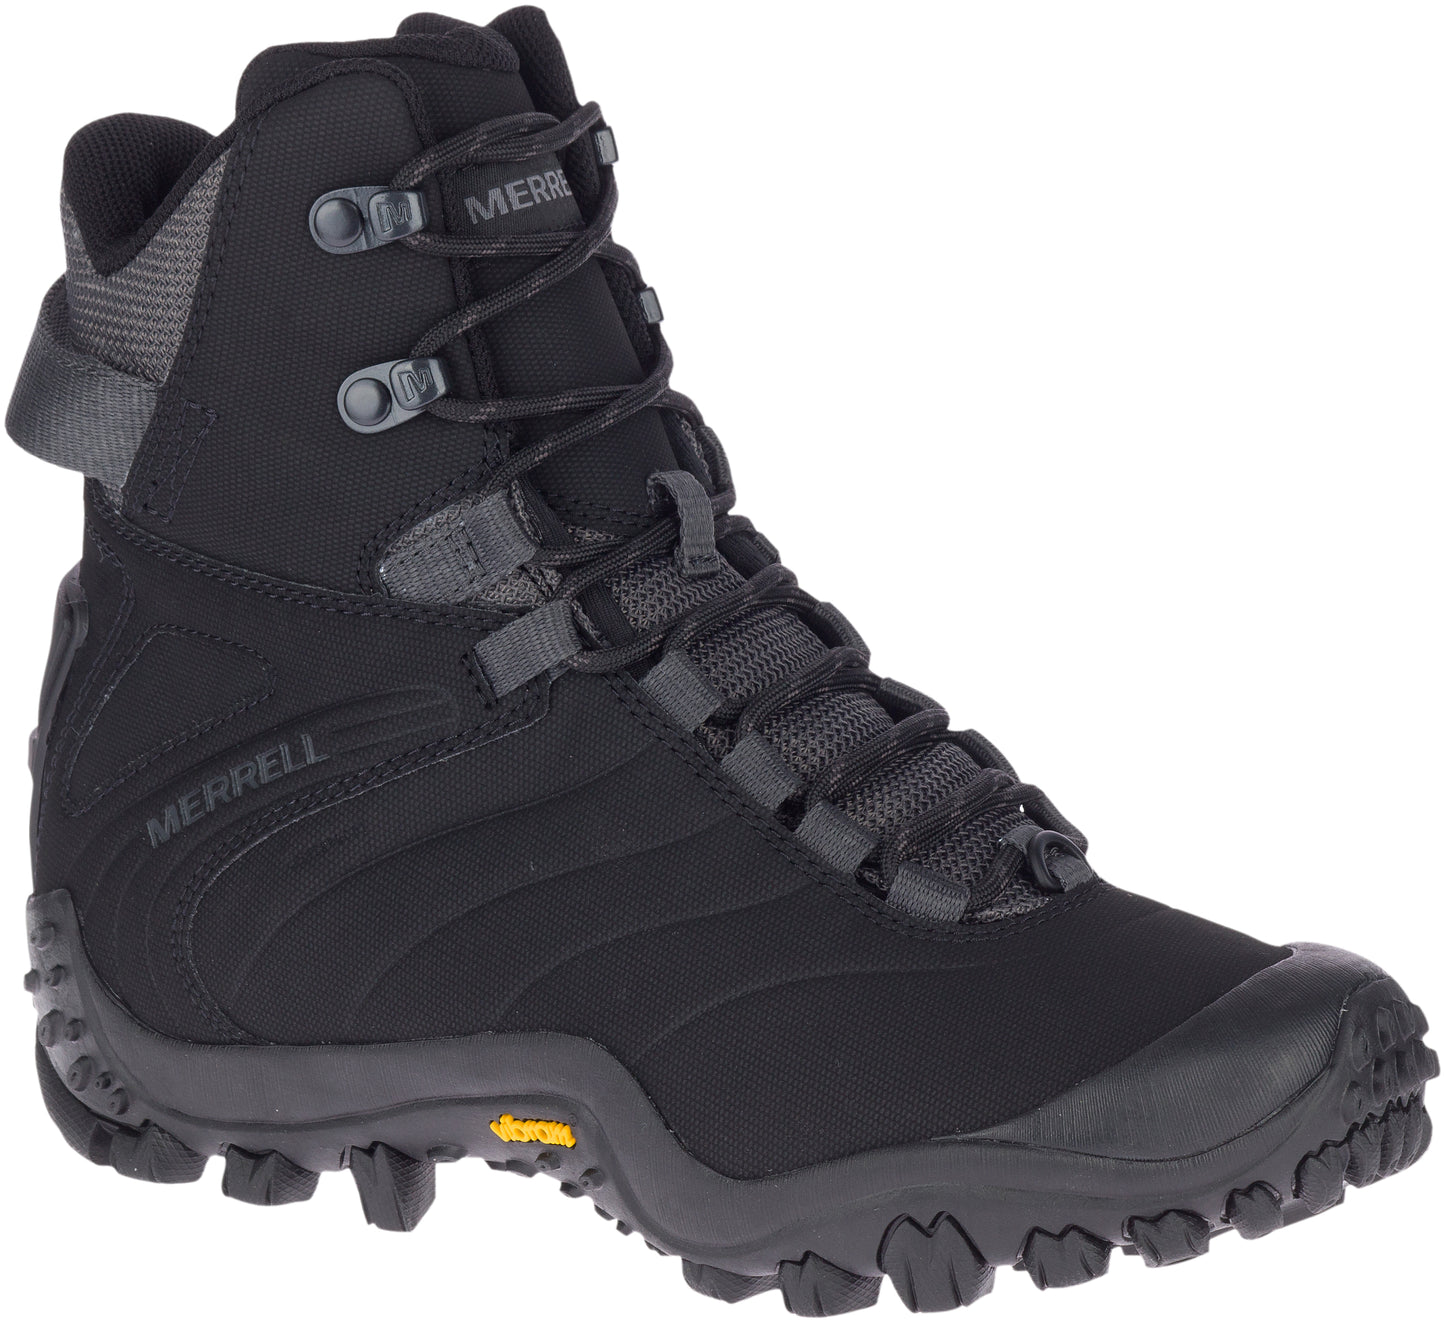 Chameleon 8 Thermo Tall Waterproof Black/Rock